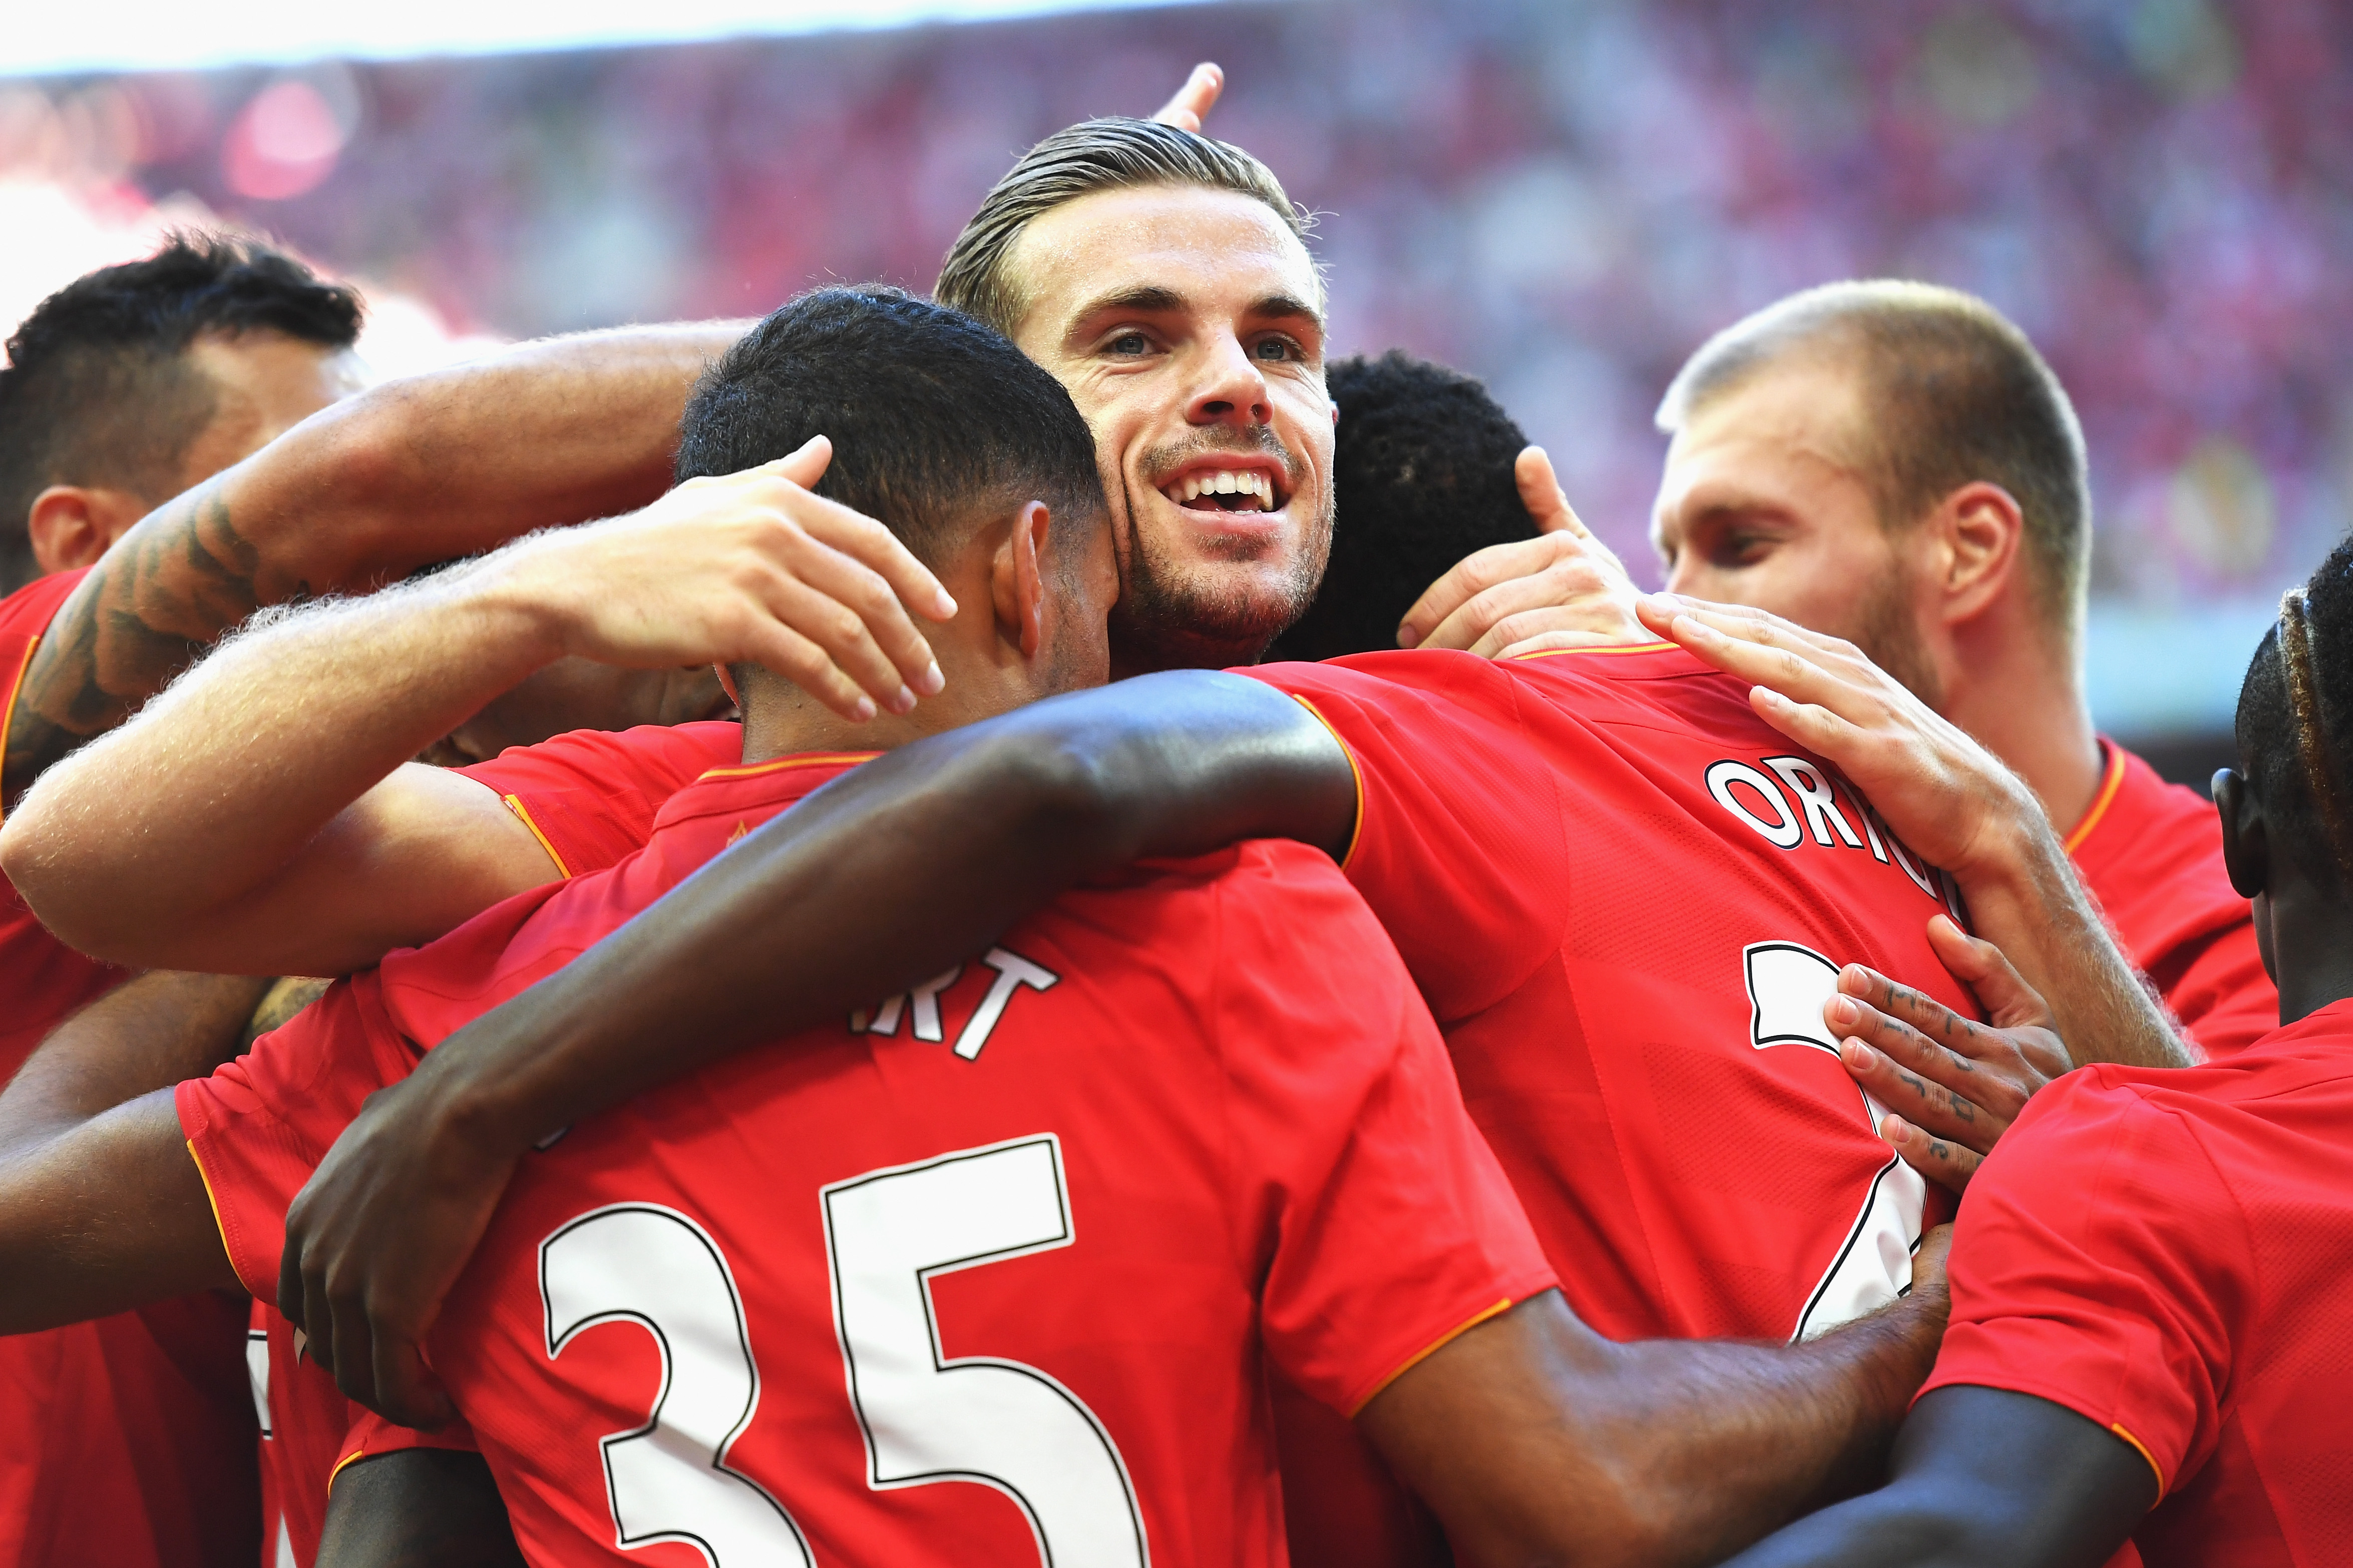 LONDON, ENGLAND - AUGUST 06:  Liverpool players including Jordan Henderson celebrate the third goal scored by Divock Origi of Liverpool during the International Champions Cup match between Liverpool and Barcelona at Wembley Stadium on August 6, 2016 in London, England.  (Photo by Mike Hewitt/Getty Images)